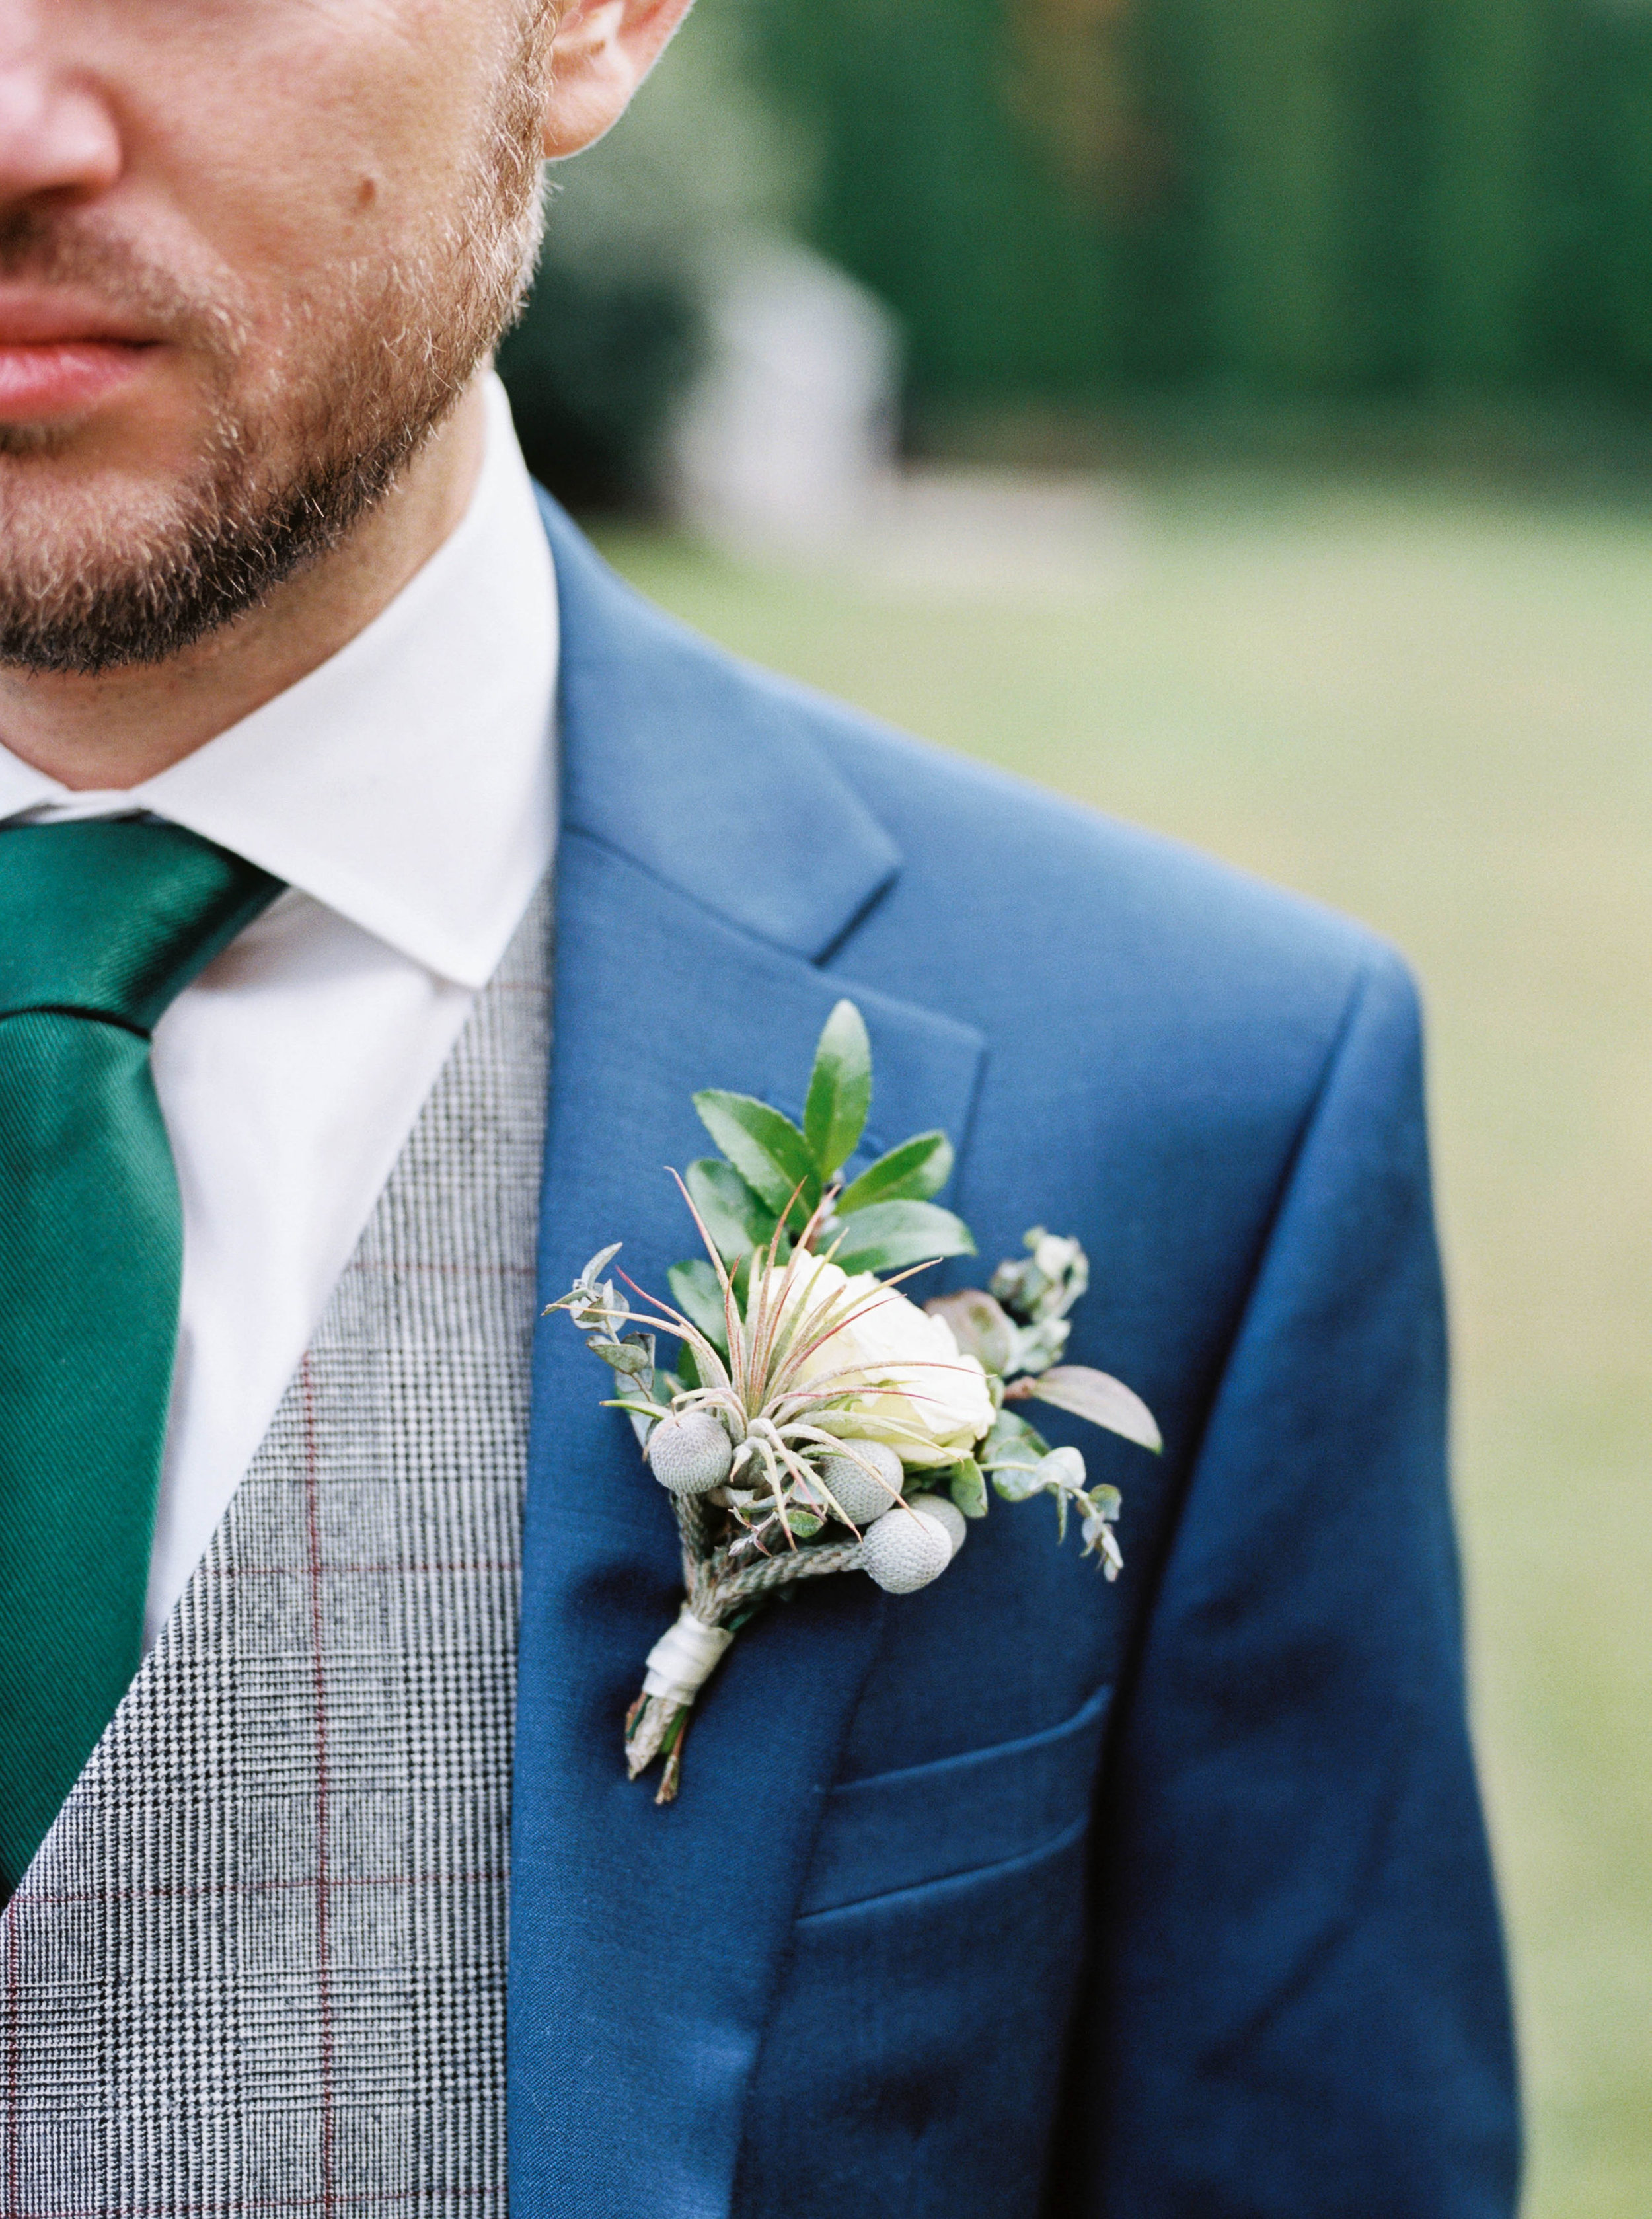 Air plant boutonniere for a fall wedding at the Cordelle // Nashville Wedding Floral Design